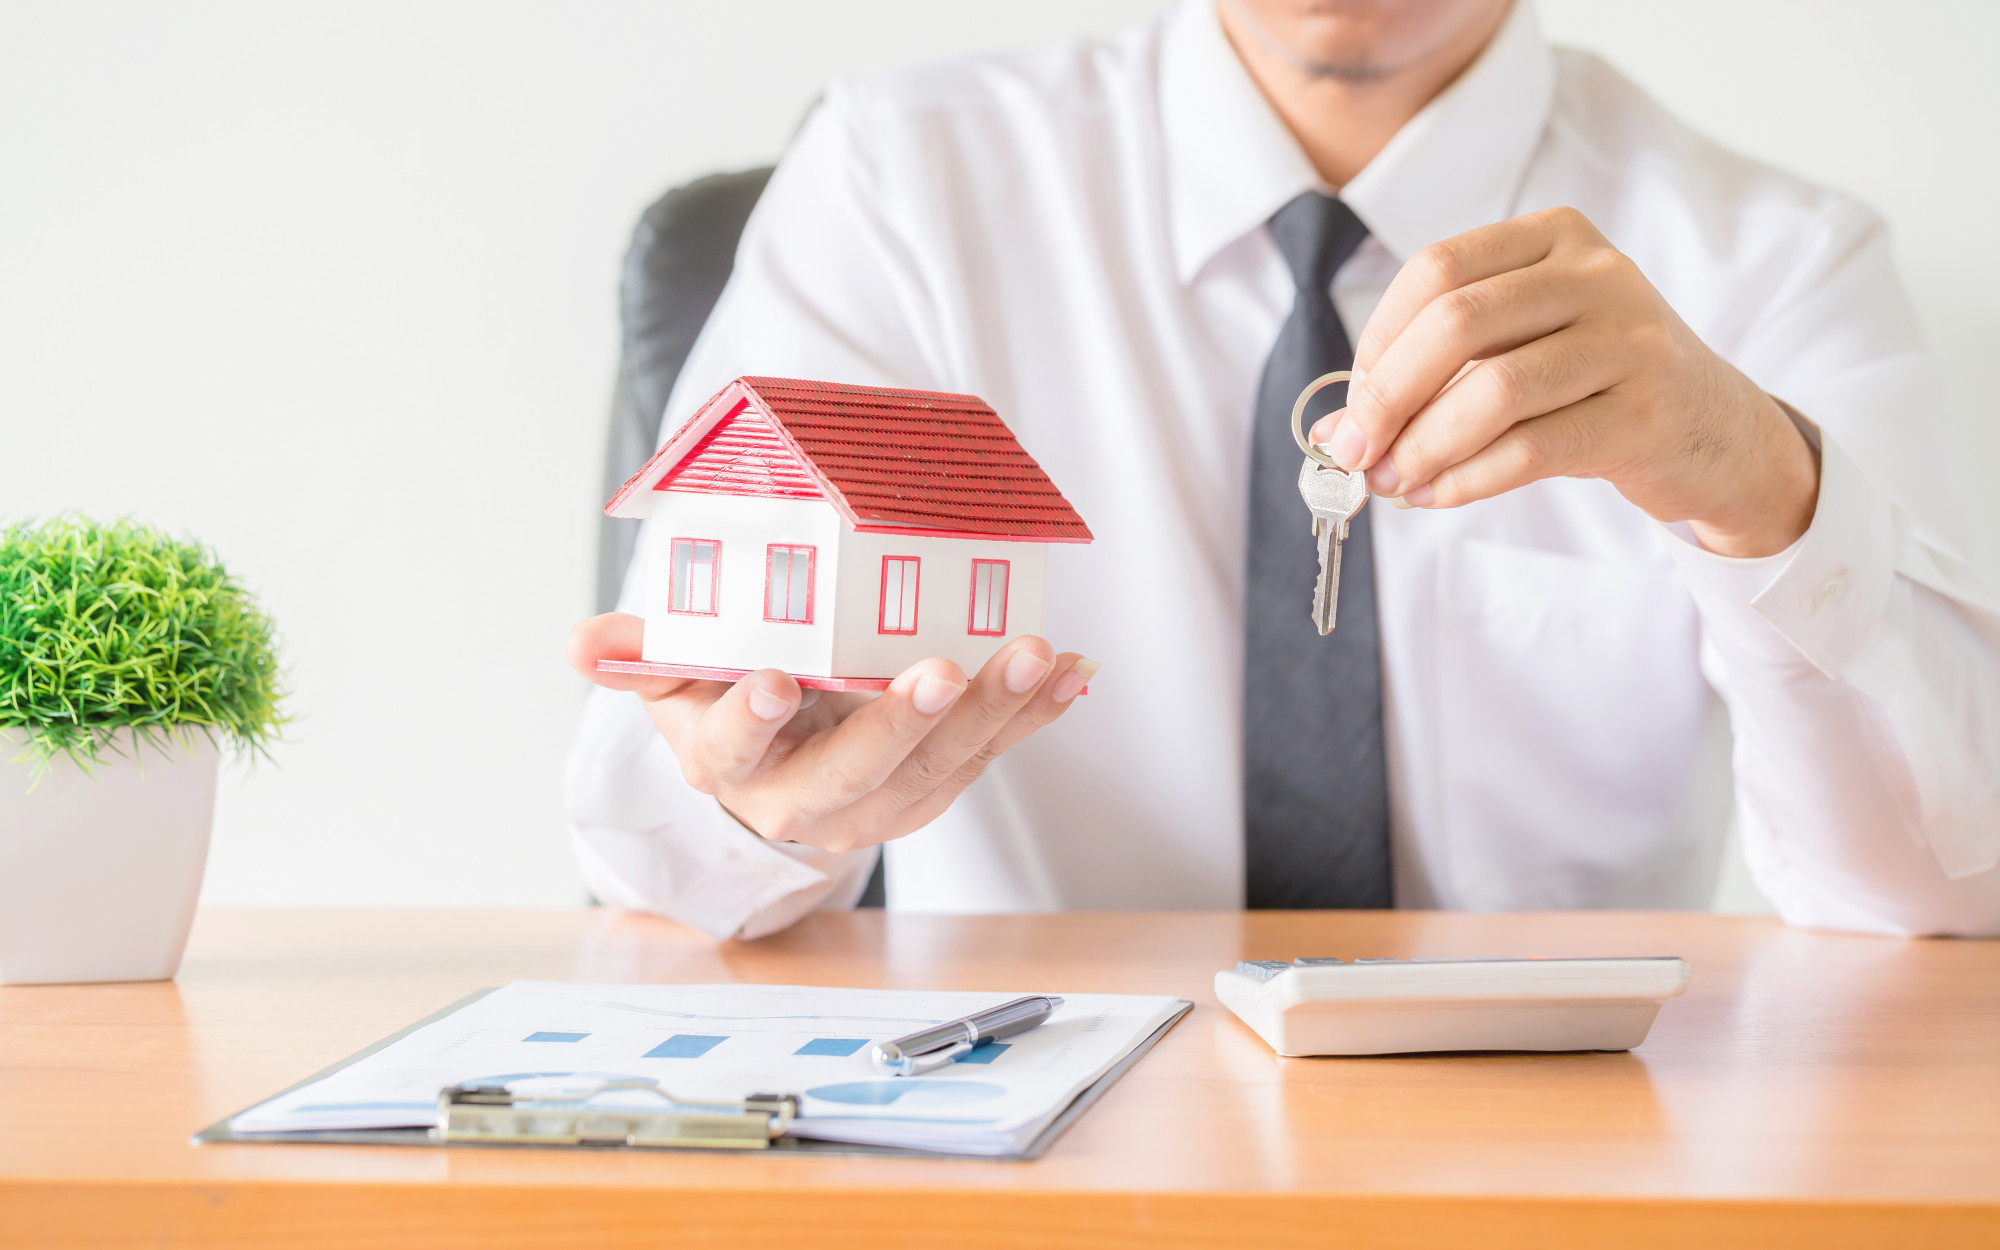 How Can I Qualify for a First-Time Home Buyer Loan?